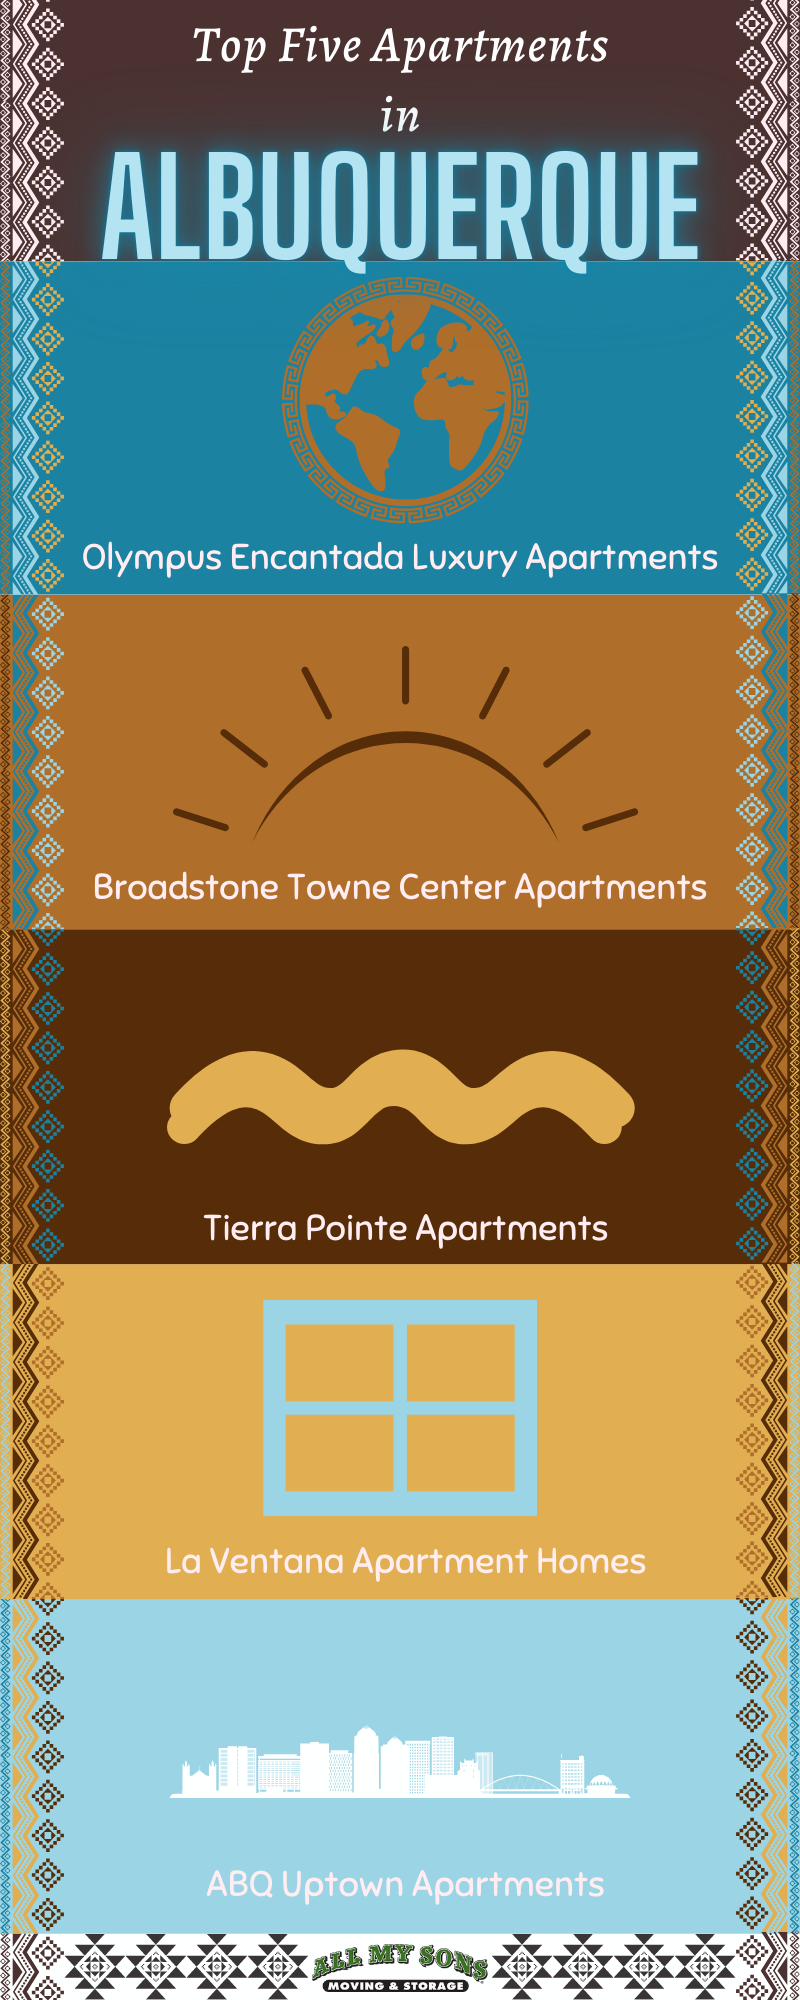 infographic detailing the top five apartments in albuquerque